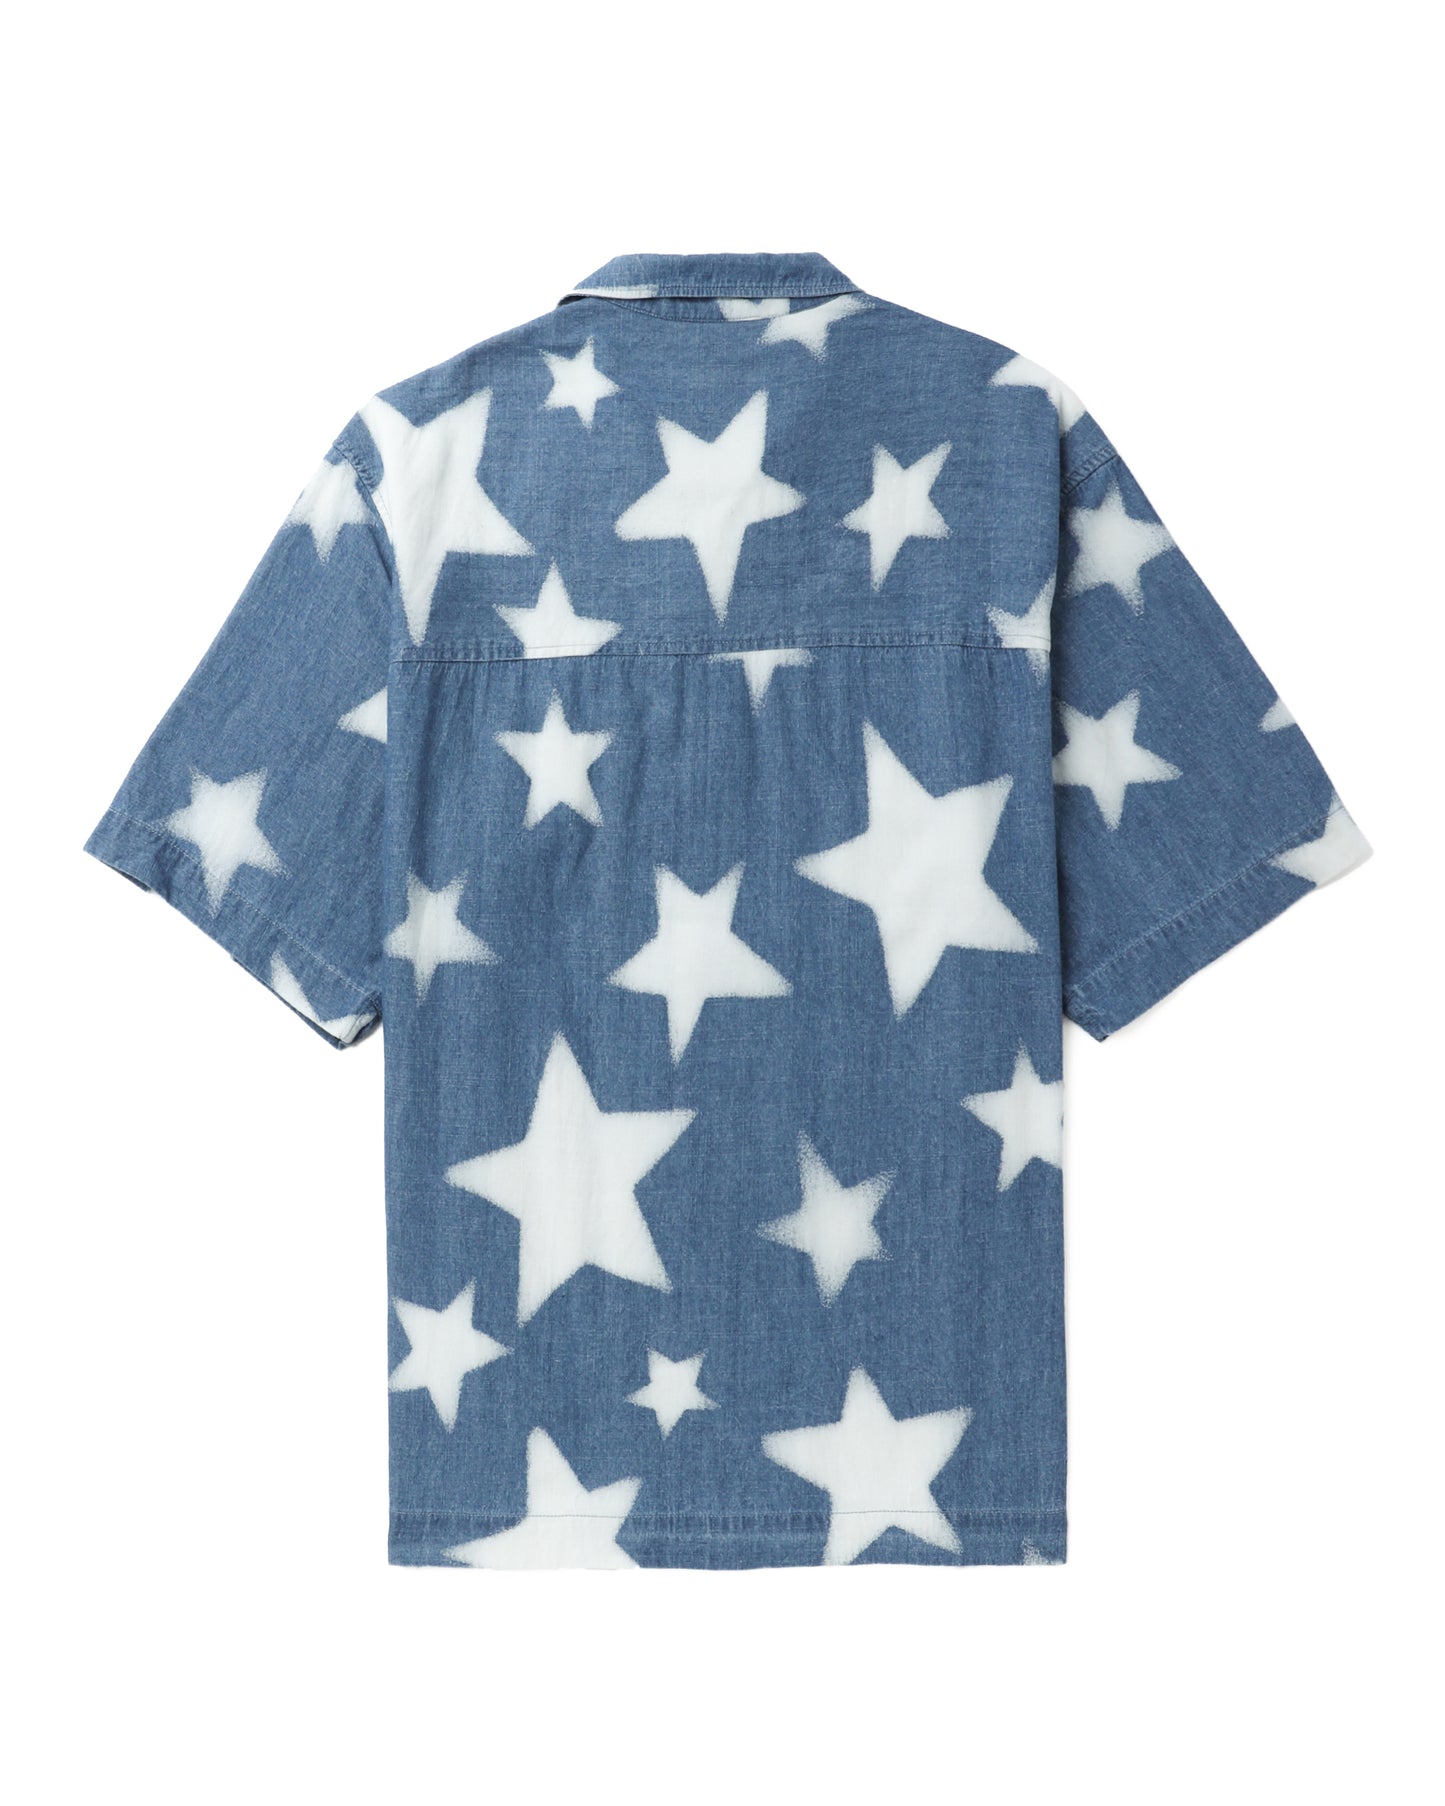 Men's Relaxed Fit Star Shirt in Blue